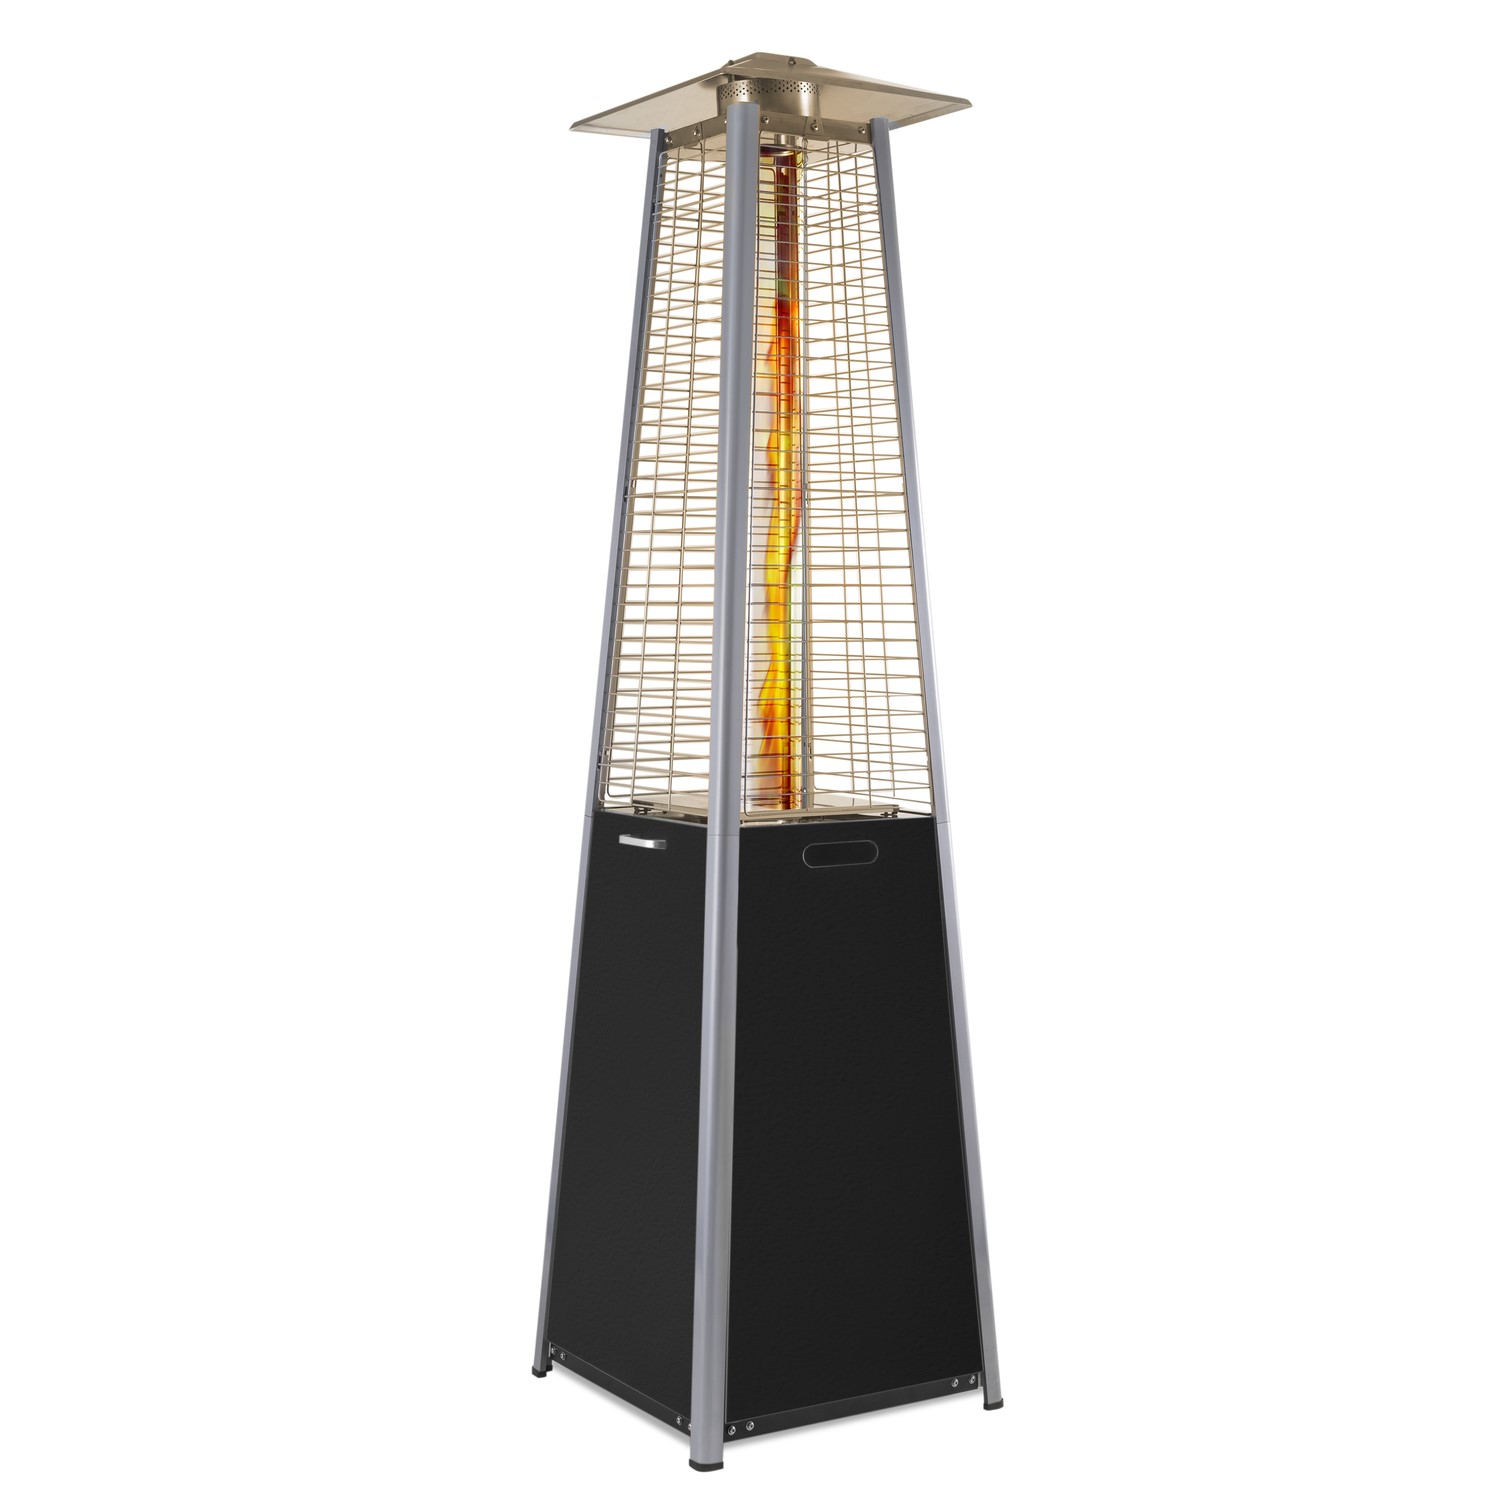 Pyramid Flame Tower Outdoor Gas Patio Heater - Black with Free Cover